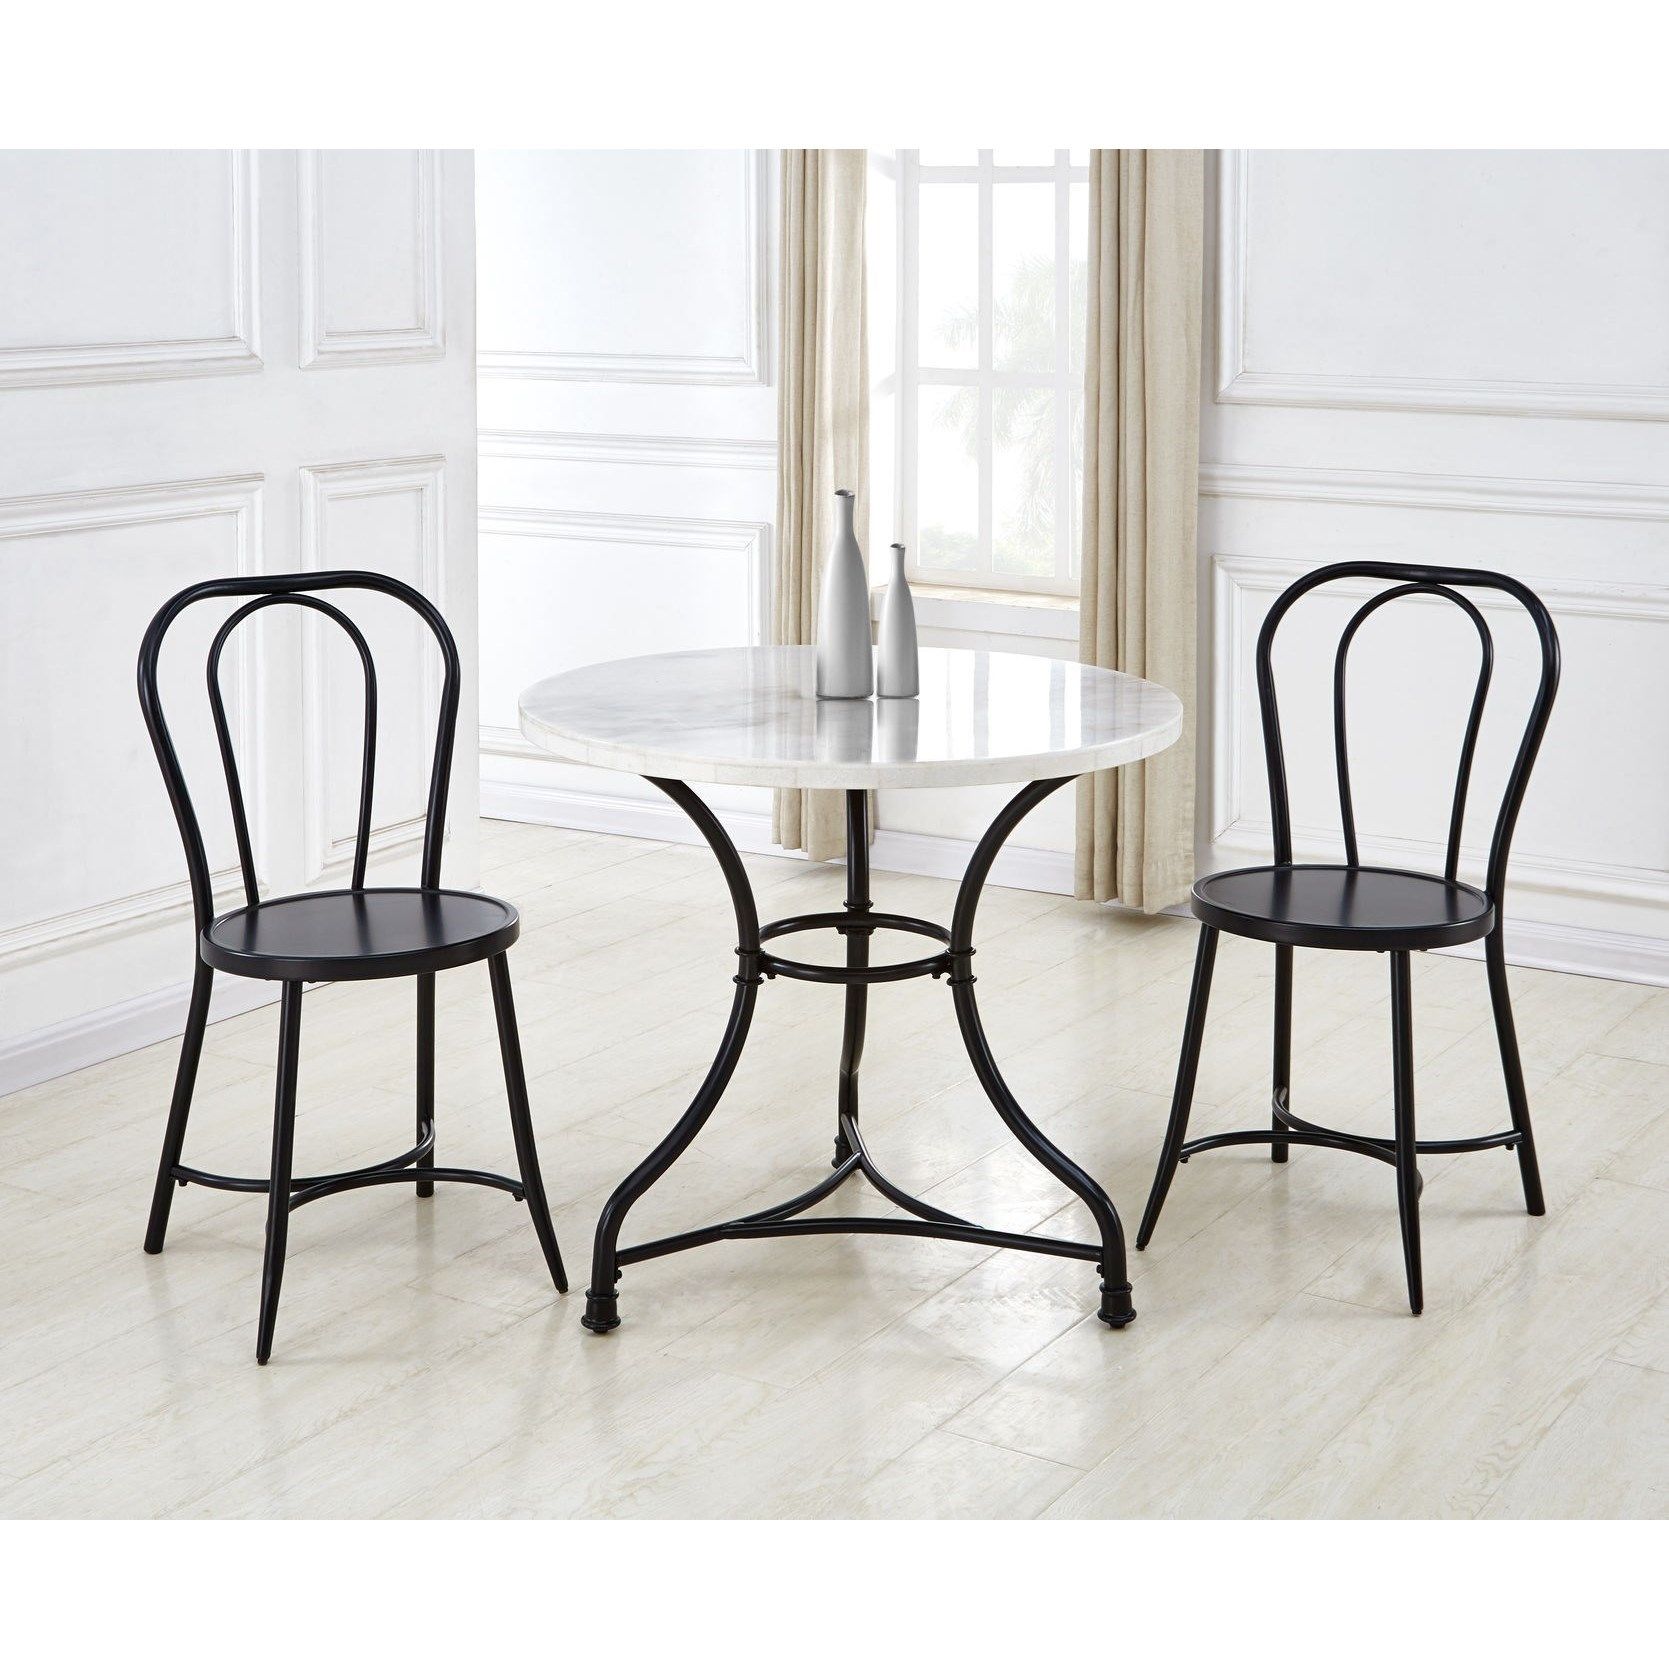 Belfort Essentials Claire Contemporary 3 Piece Bistro Table And Chair Within 3 Piece Bistro Dining Sets (View 13 of 15)